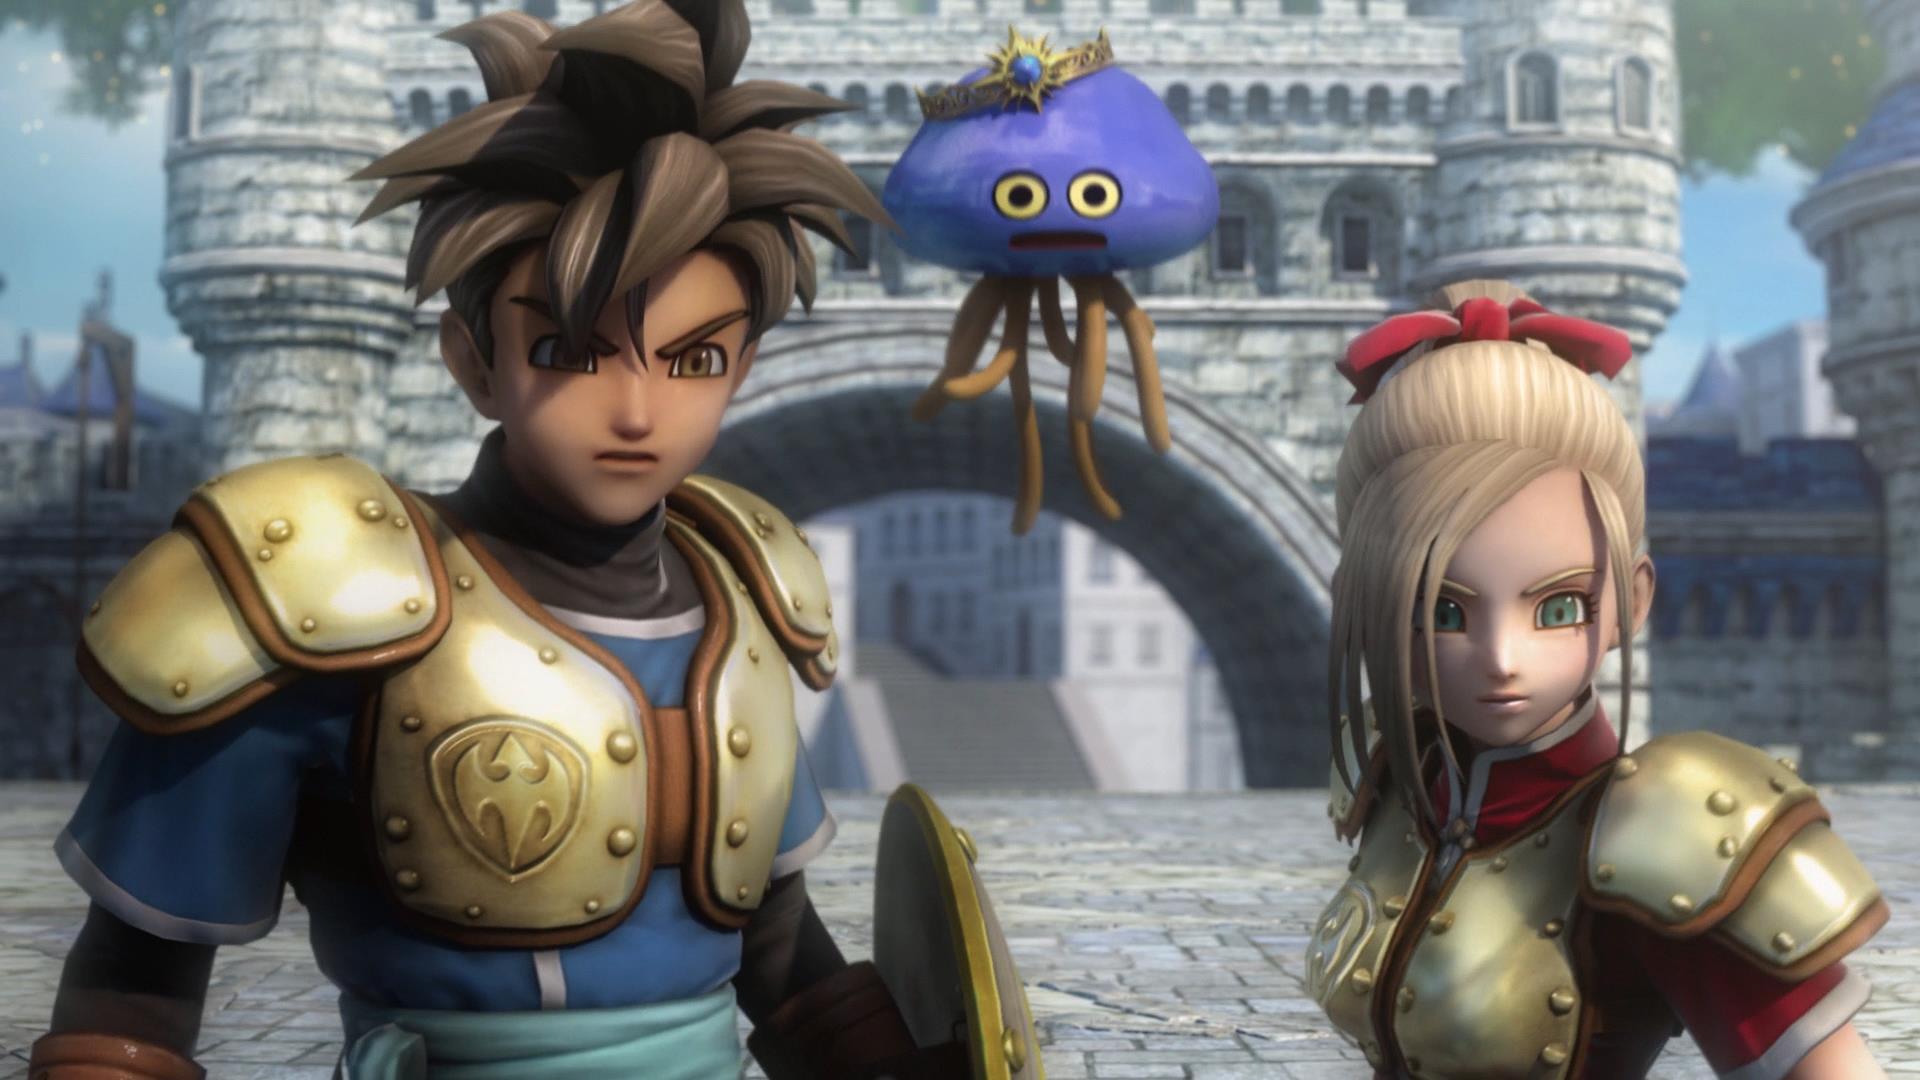 Video Game Dragon Quest Heroes HD Wallpaper | Background Image